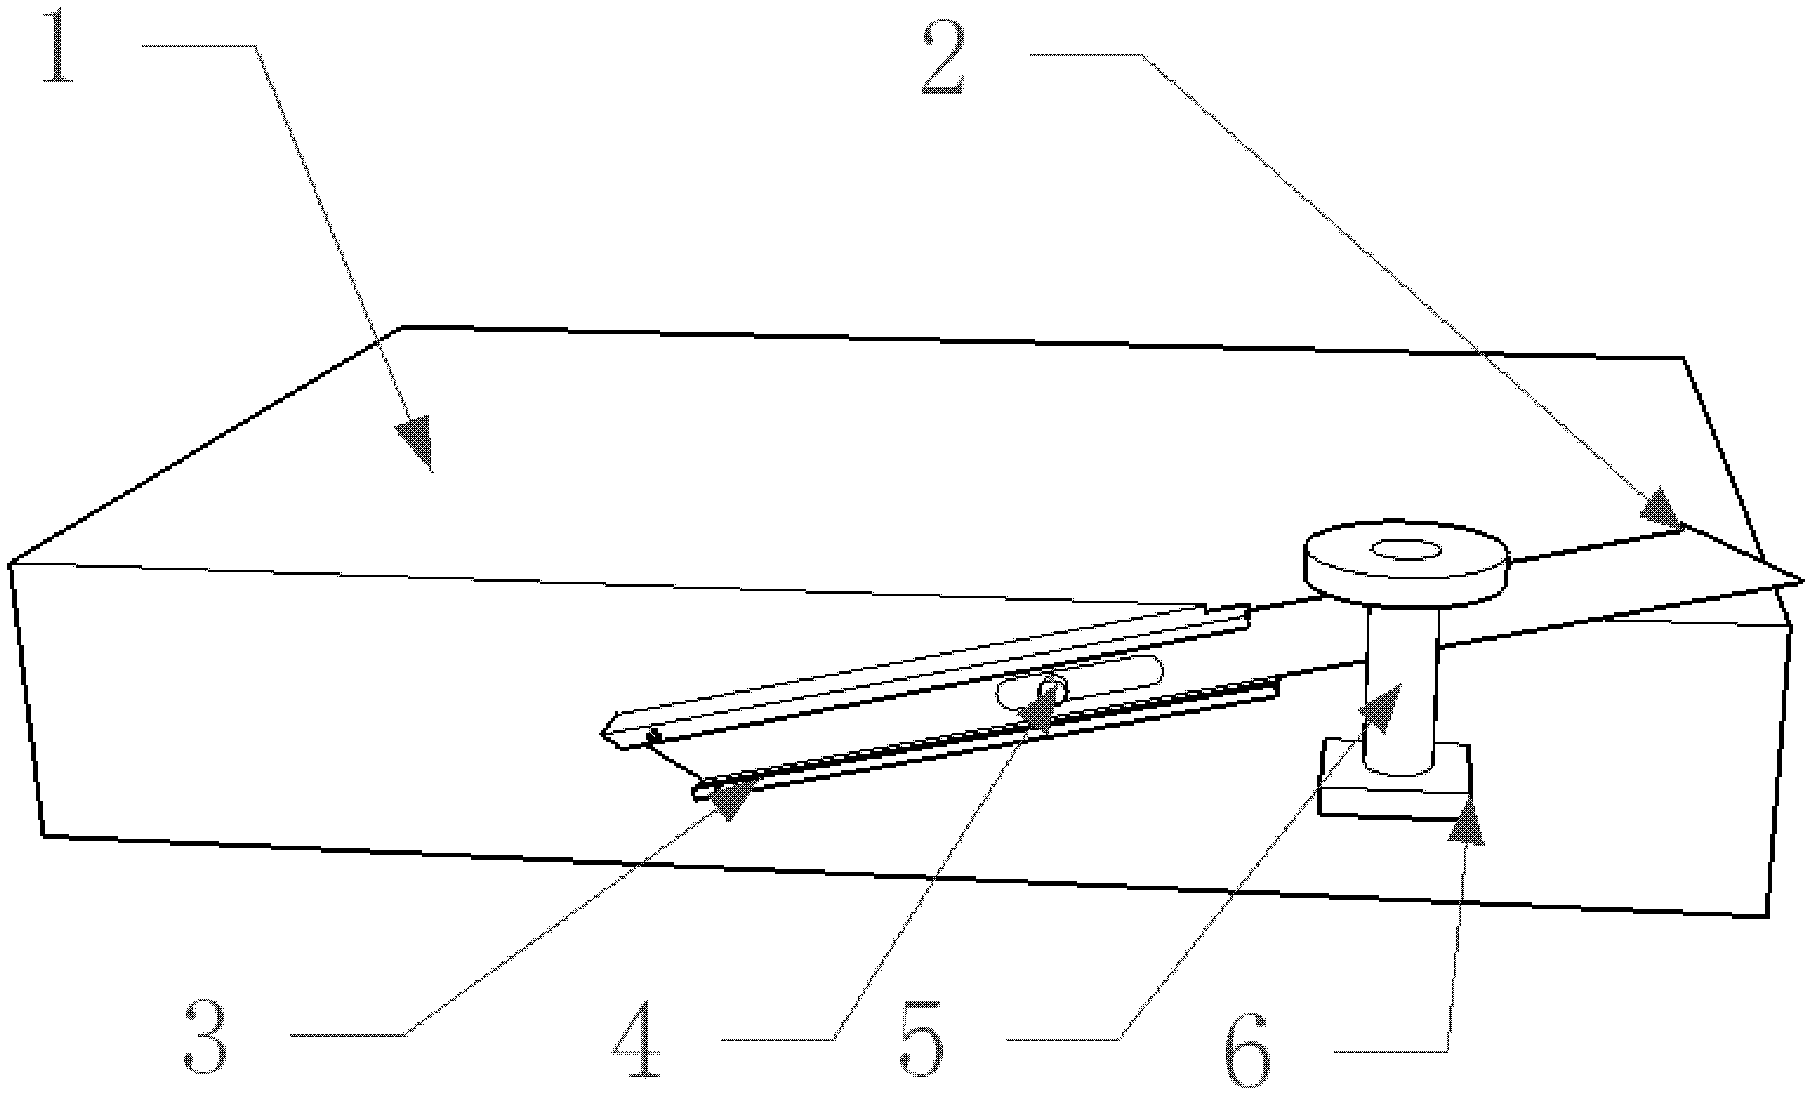 Novel leather rope cutting apparatus